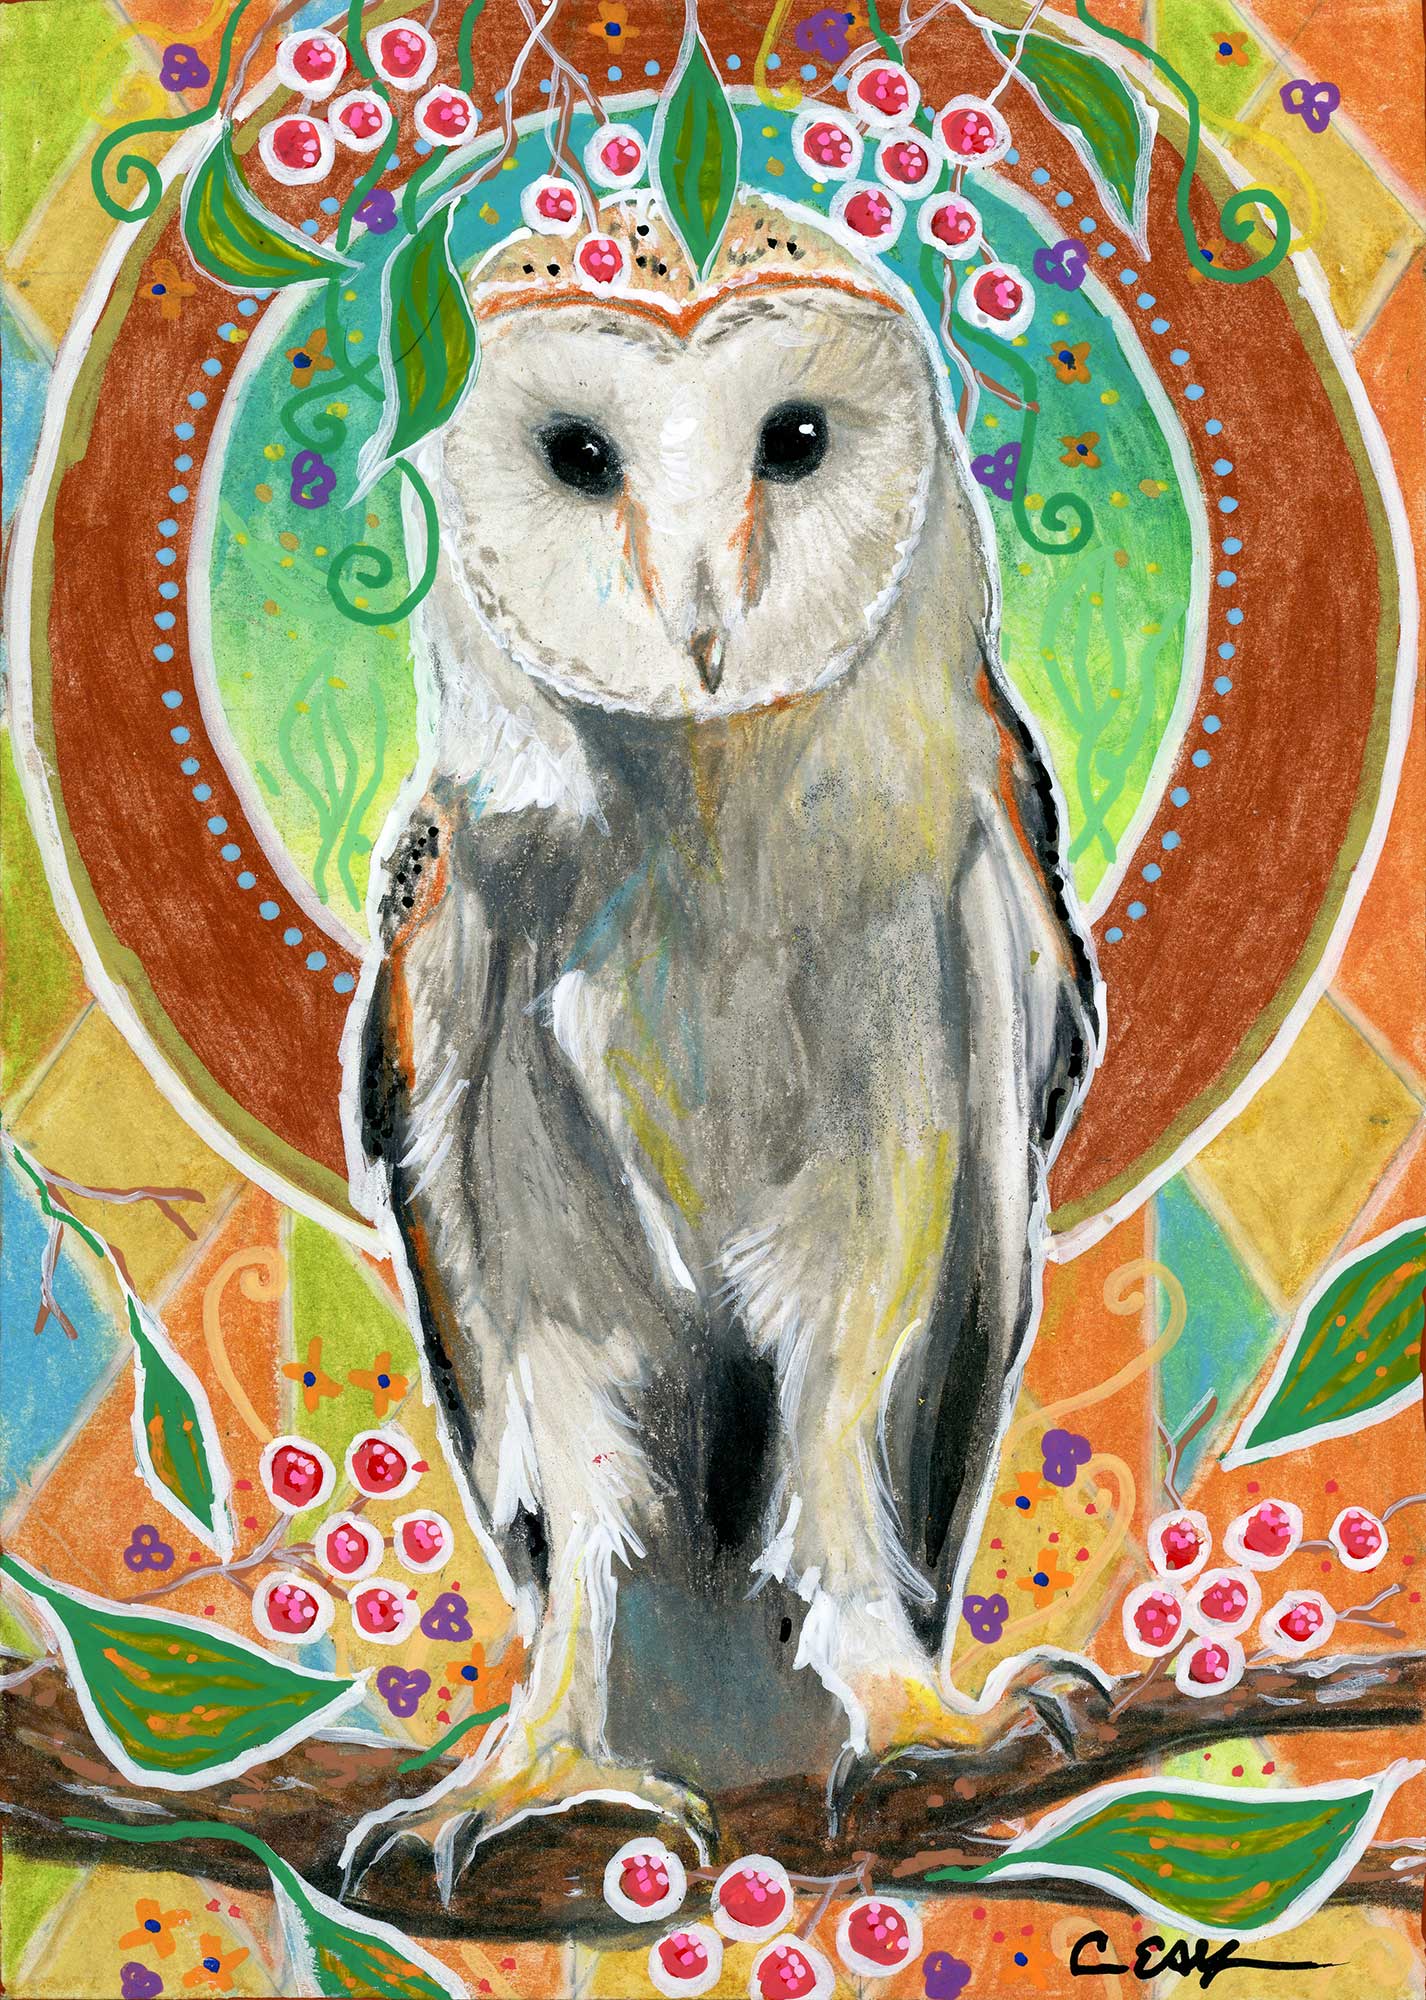 SOLD - "Barn Owl and Berries", 5" x 7", mixed media